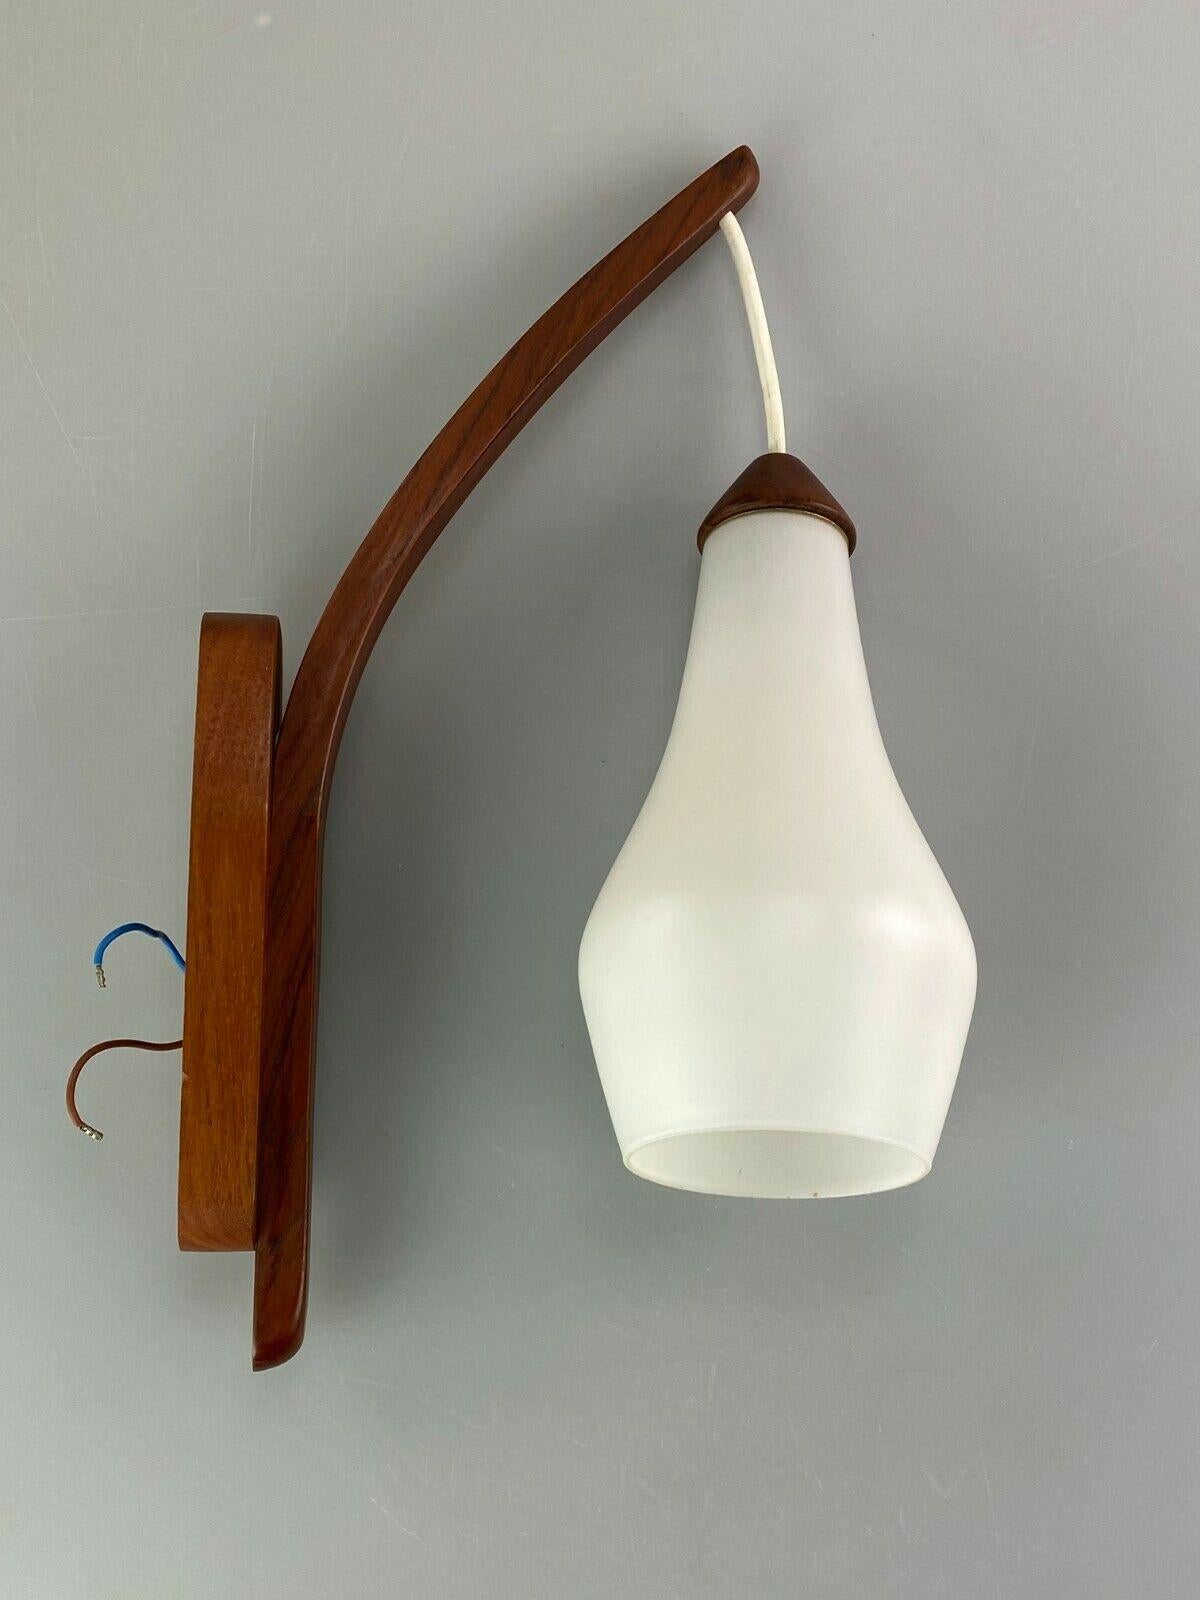 60s 70s lamp teak light wall lamp Uno & Östen Kristiansson Luxus 60s

Object: wall lamp

Manufacturer: Luxury

Condition: good

Age: around 1960-1970

Dimensions:

22cm x 11cm x 38cm

Other notes:

The pictures serve as part of the